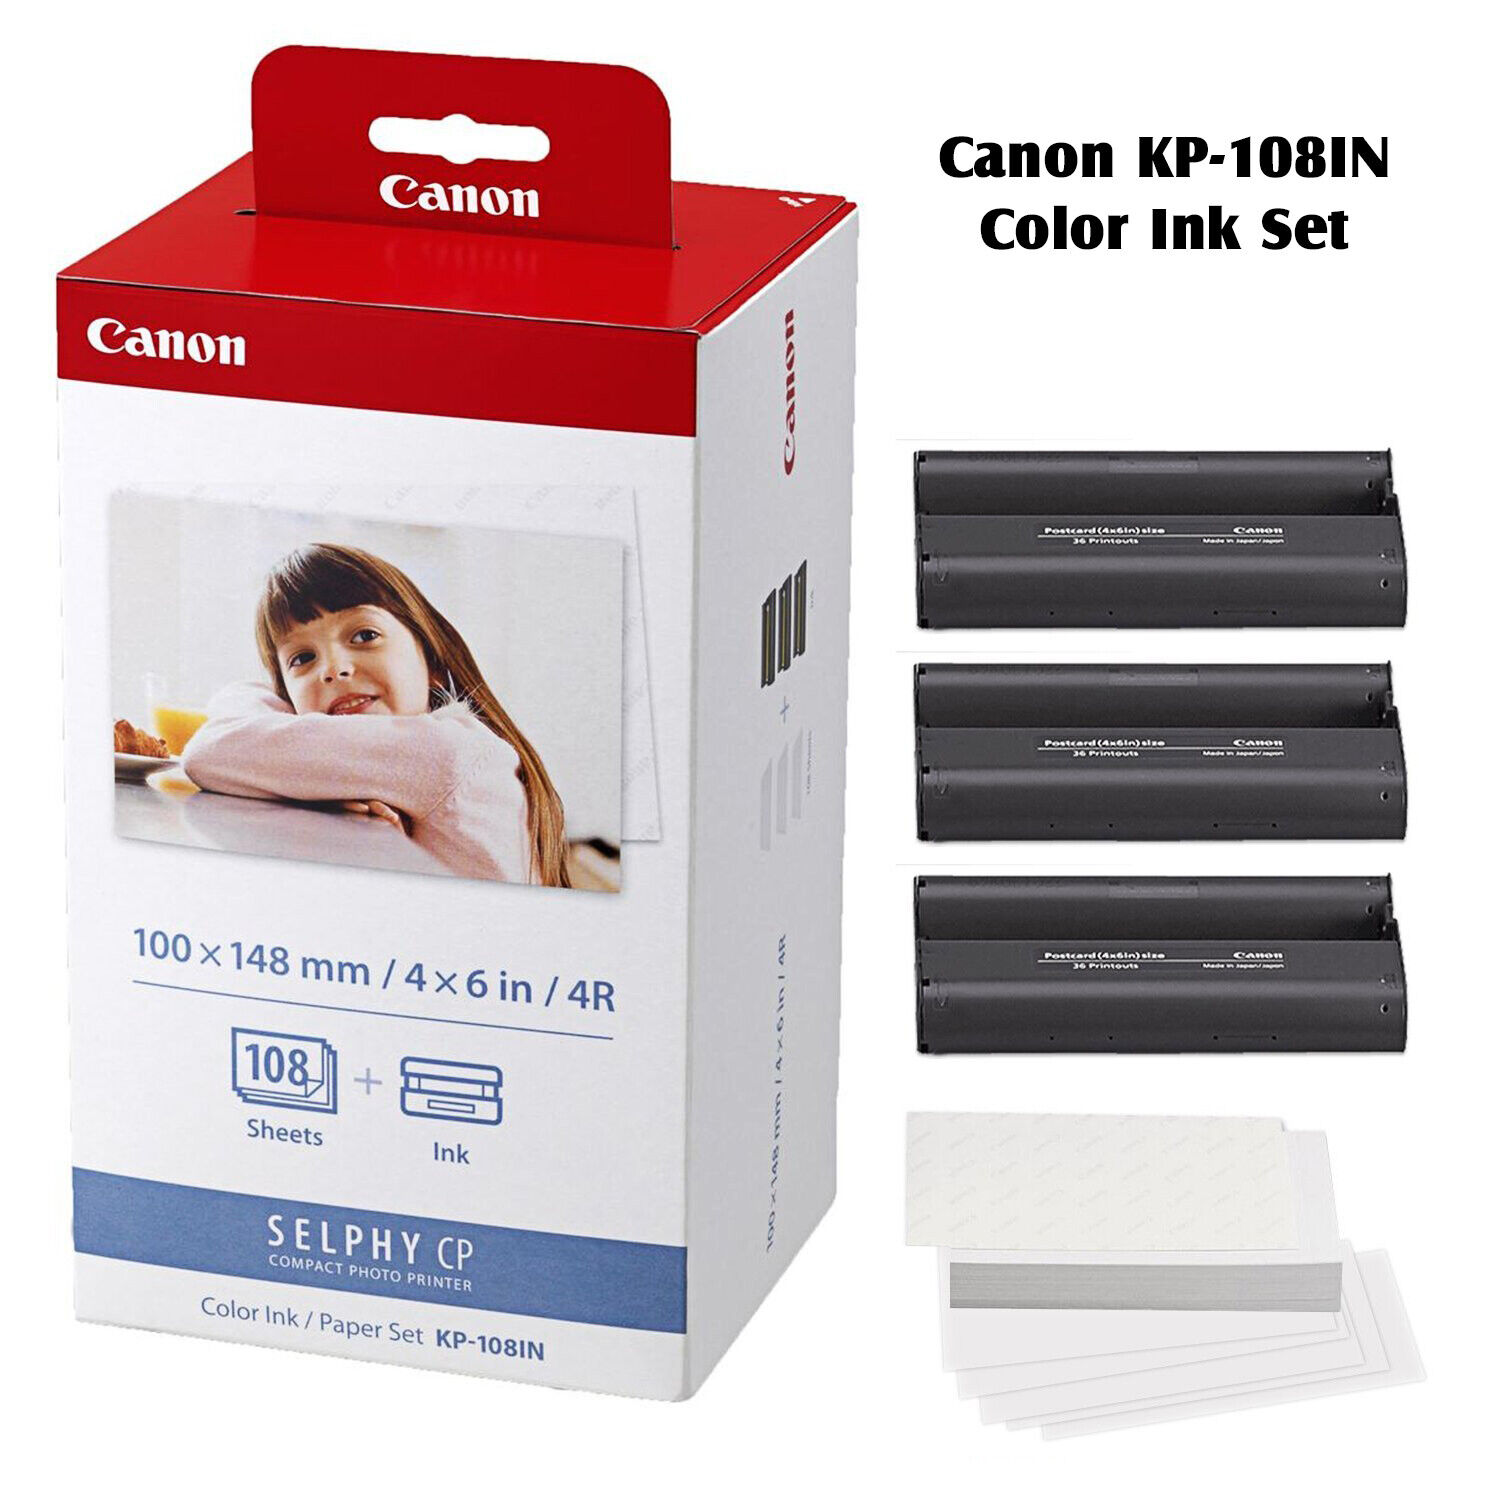 Canon KP-108IN Selphy 4x6 Color Ink Paper Set 108 Sheets with 3 Toners 3115B001 